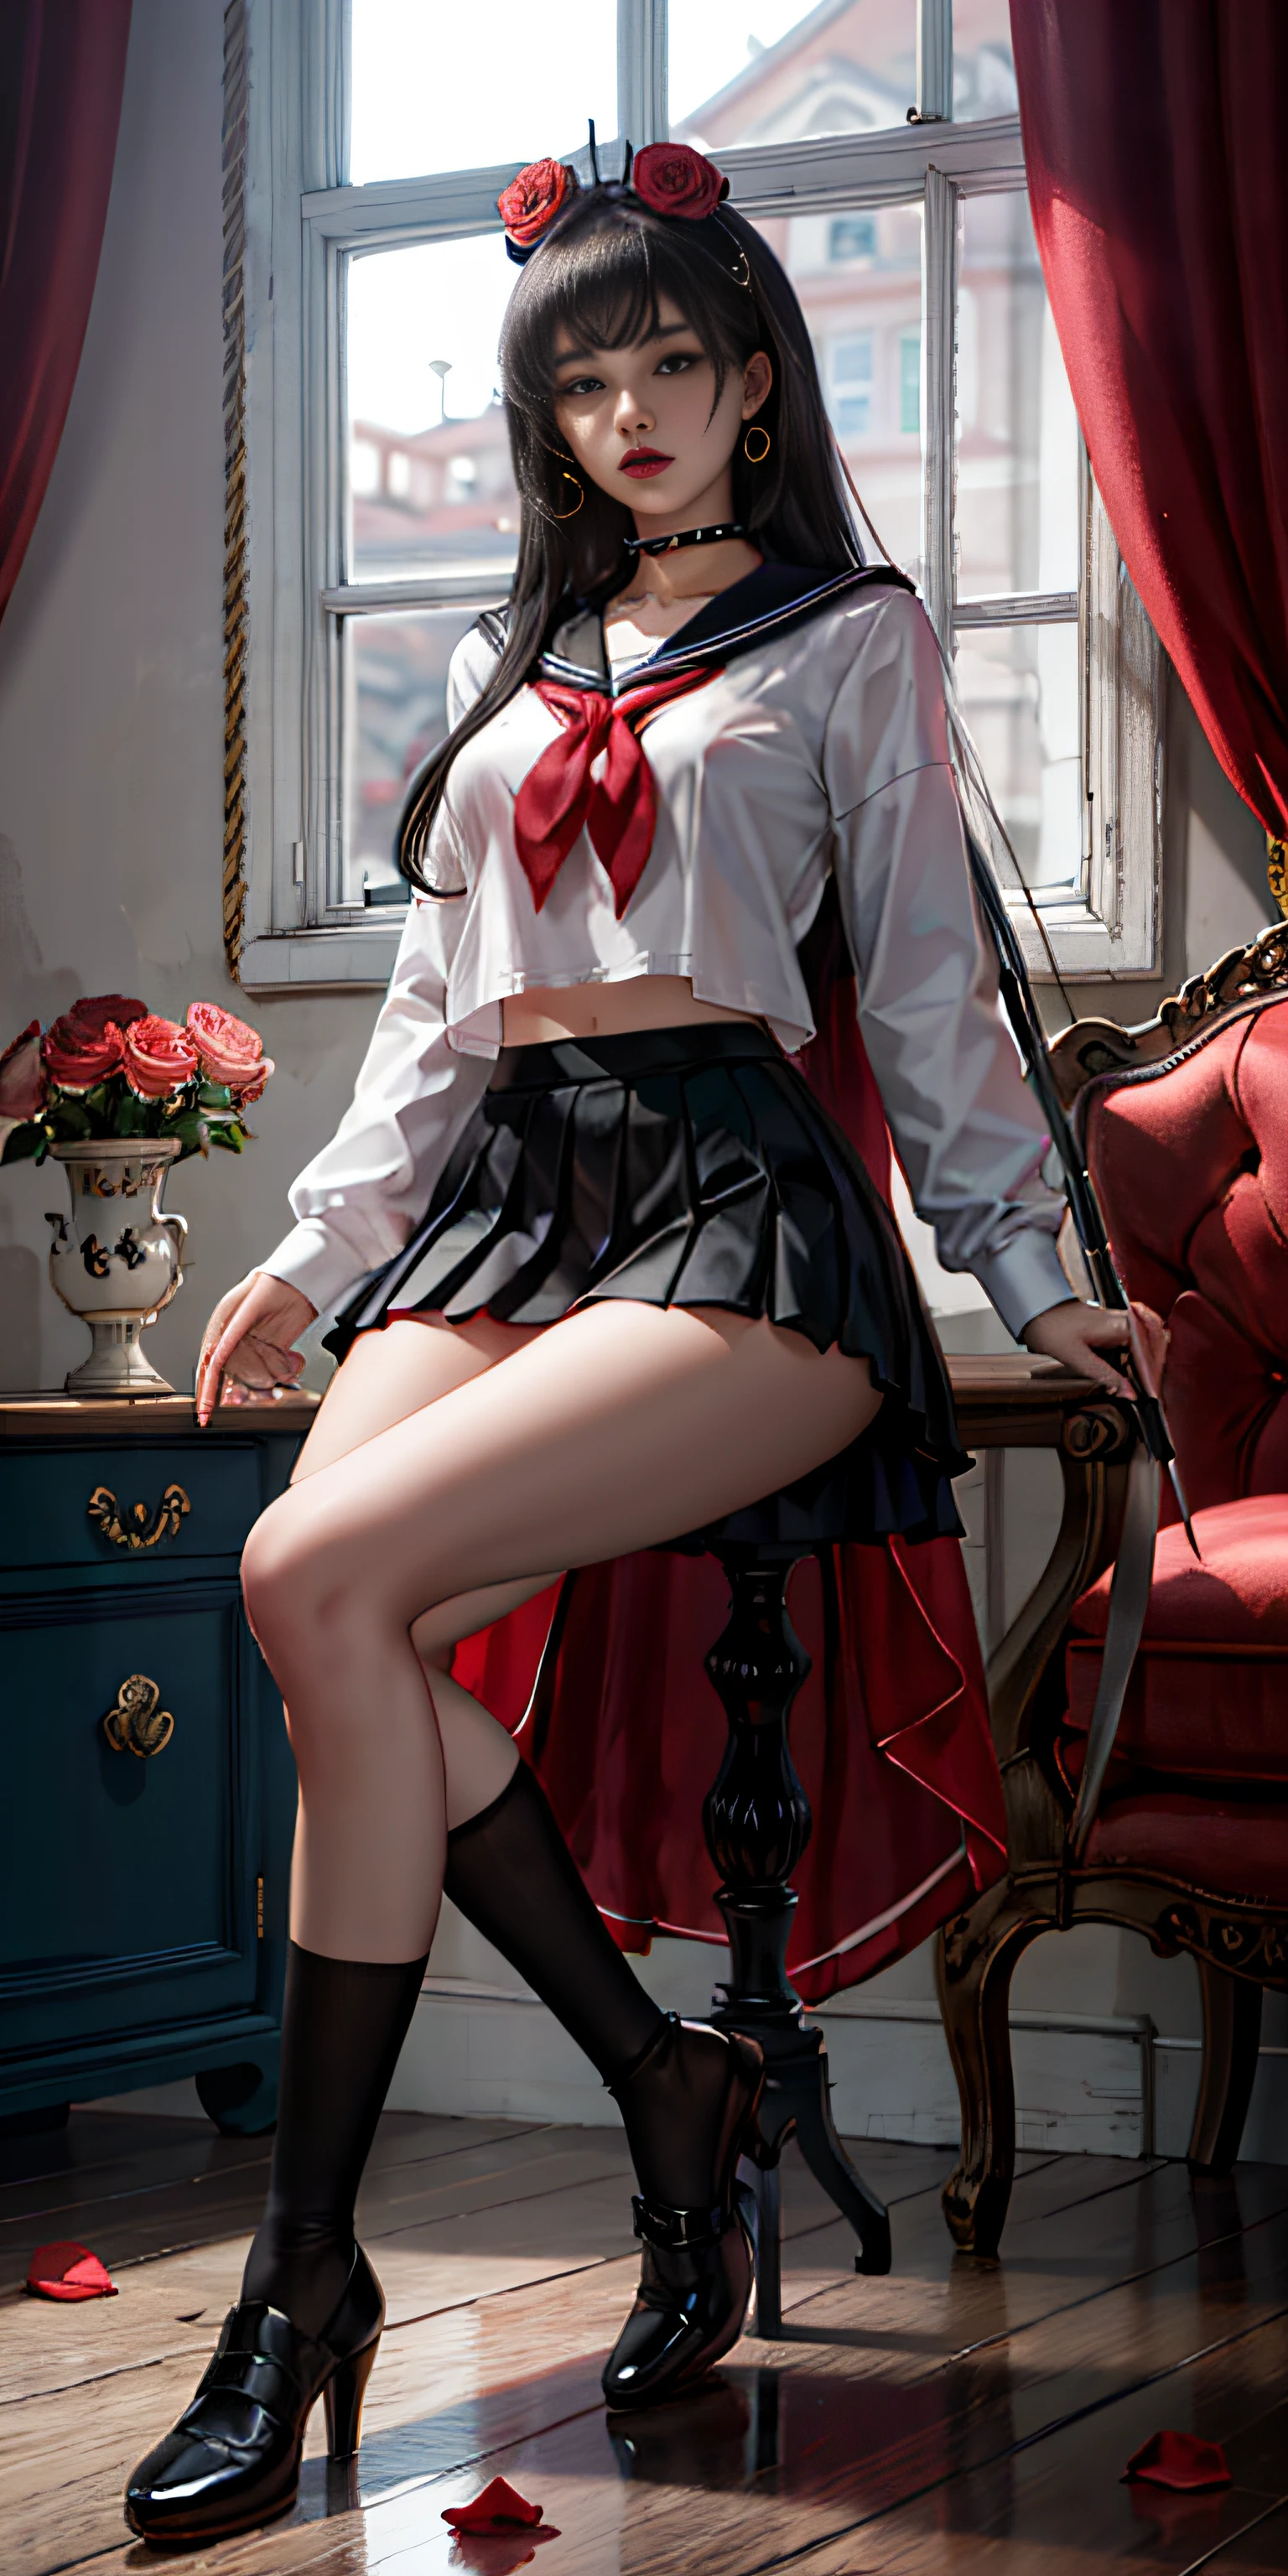 Super beautiful eyes、camellia, florals, red_flower, red_rose, rose, knives, 1girl in, pink_rose, pink_flower, spider_lily, shoe, long_hair, school_uniform, serafuku, scabbard, skirt by the, solo, sheathed, vases, looking_at_viewer, sitting on, orange_flower, pleated_skirt, rose_petals, black_shirt, black_legwear, black_skirt, hibiscus, very_long_hair, parted_lips, lowfers, sailor_collar, black_hair, neckerchief